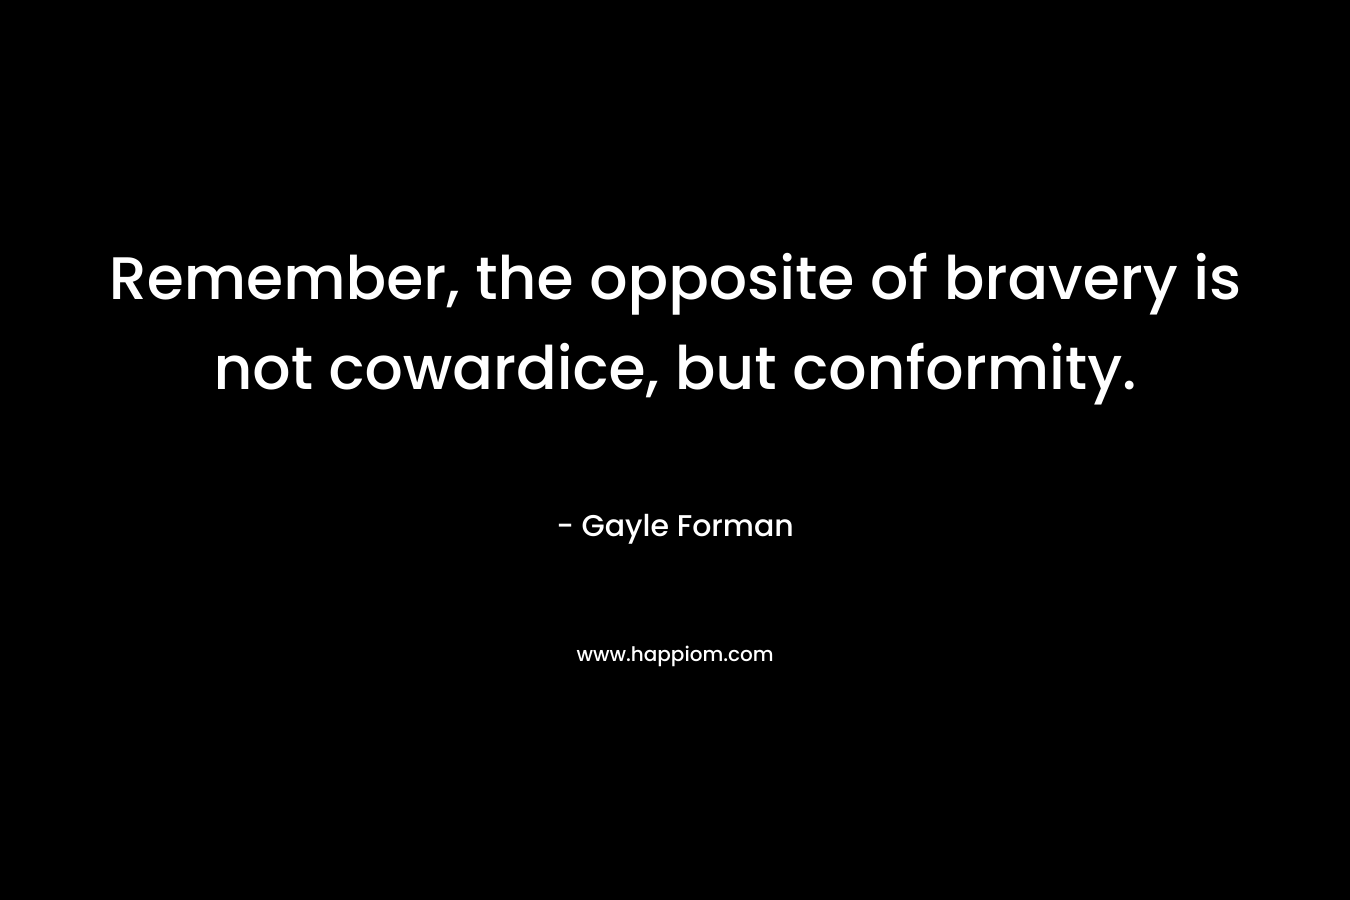 Remember, the opposite of bravery is not cowardice, but conformity. – Gayle Forman